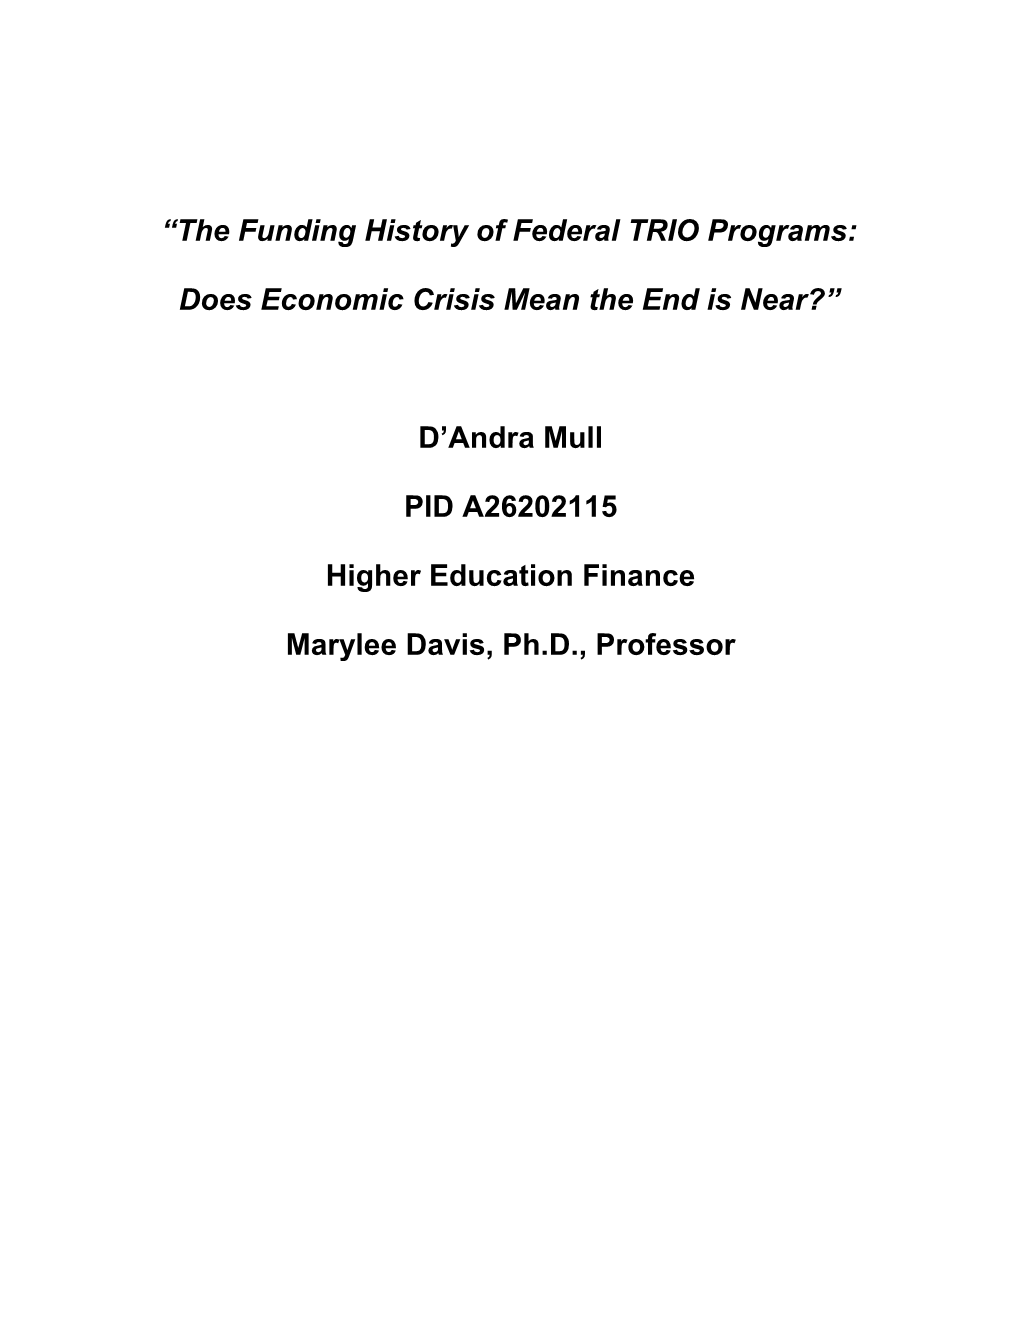 The Funding History of Federal TRIO Programs: Does Economic Crisis Mean the End Is Near